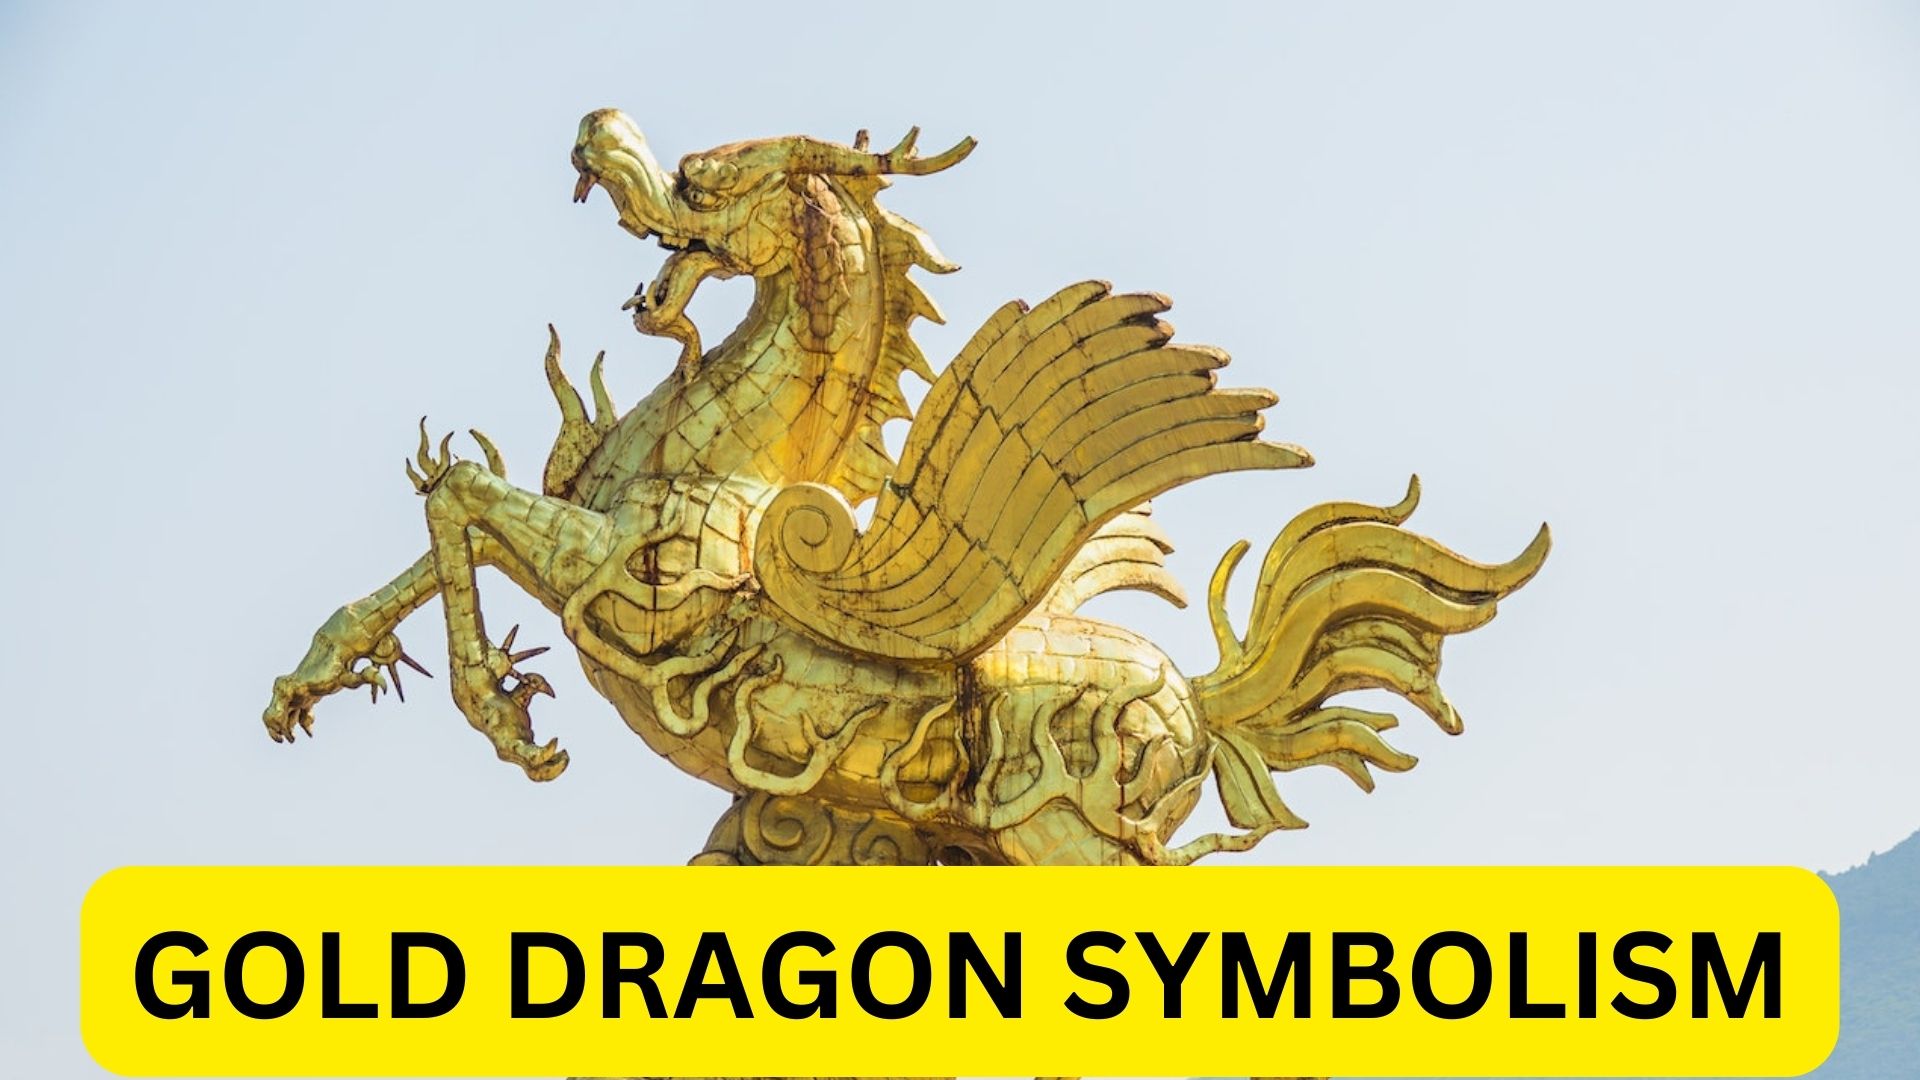 Gold Dragon Symbolism - Wealth, Prosperity, Strength, Harvest, And Power